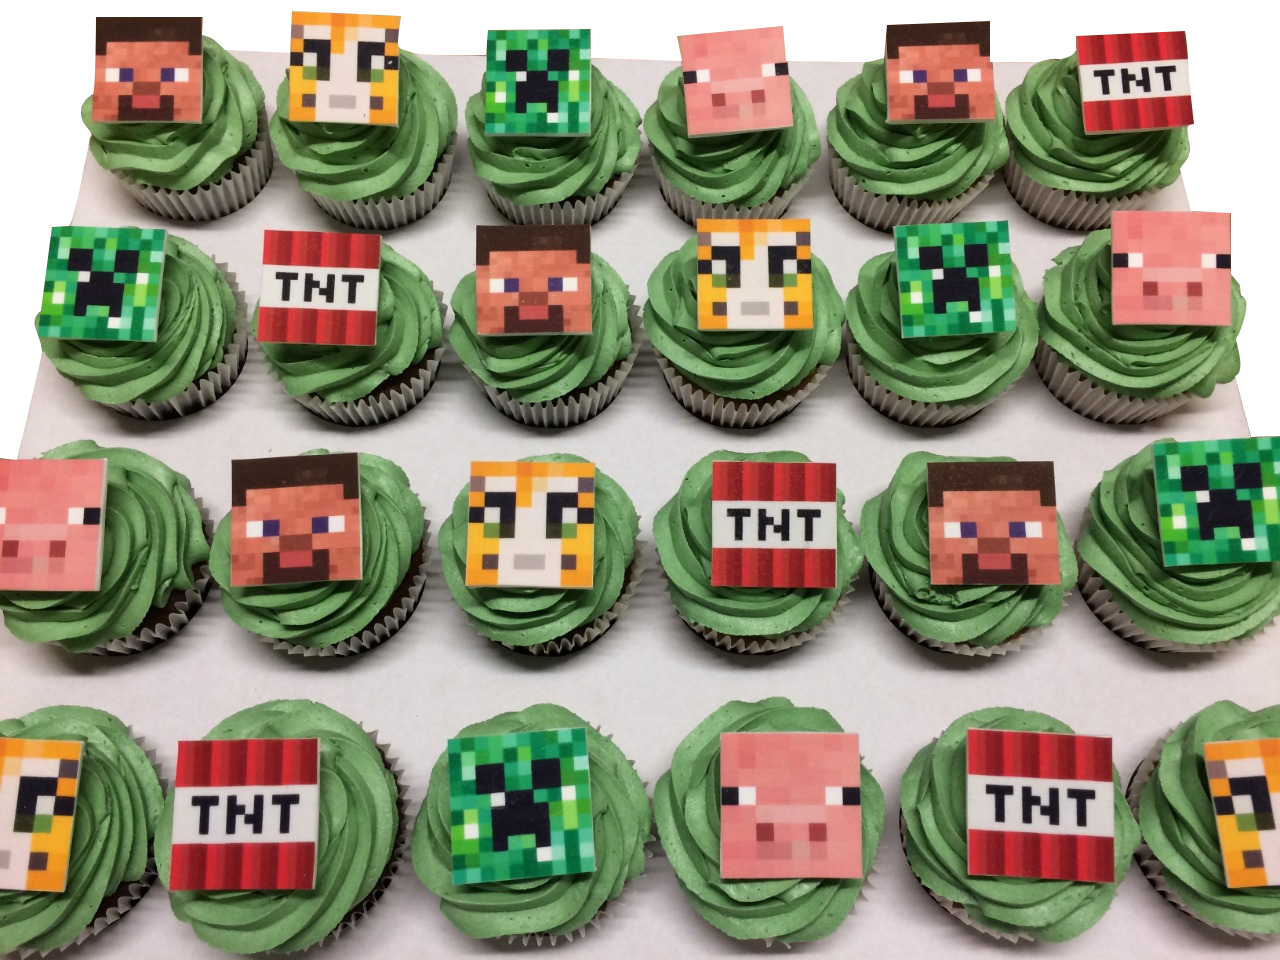 Minecraft Theme Cupcakes - Pack of 6